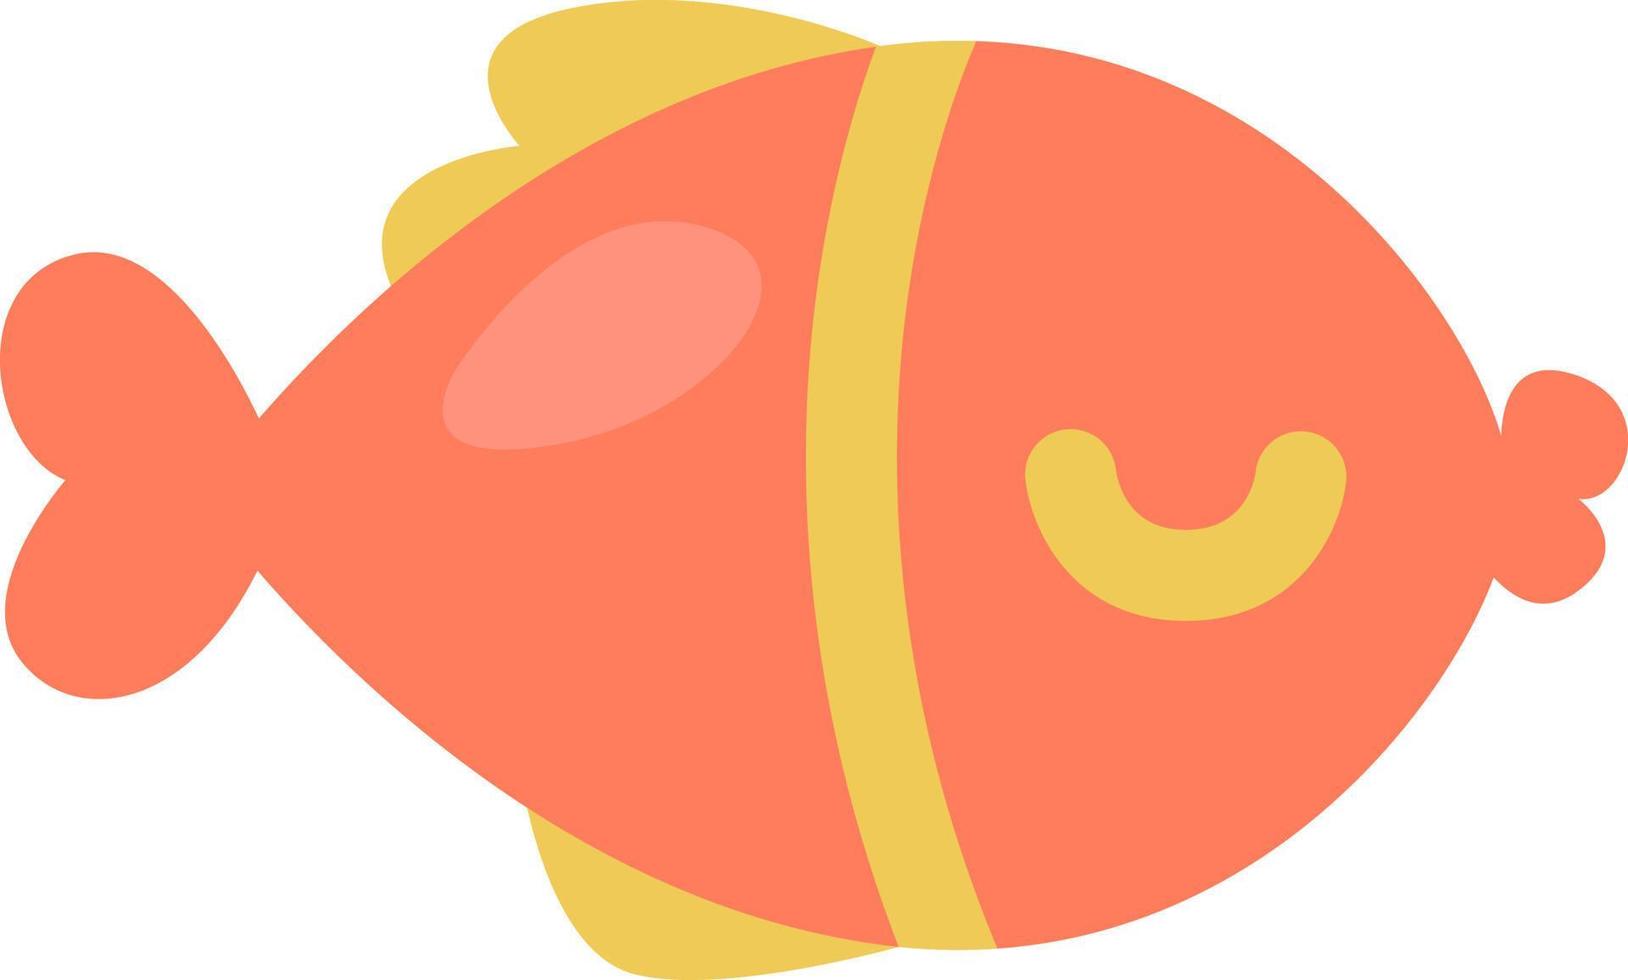 Ocean red fish, illustration, vector on a white background.